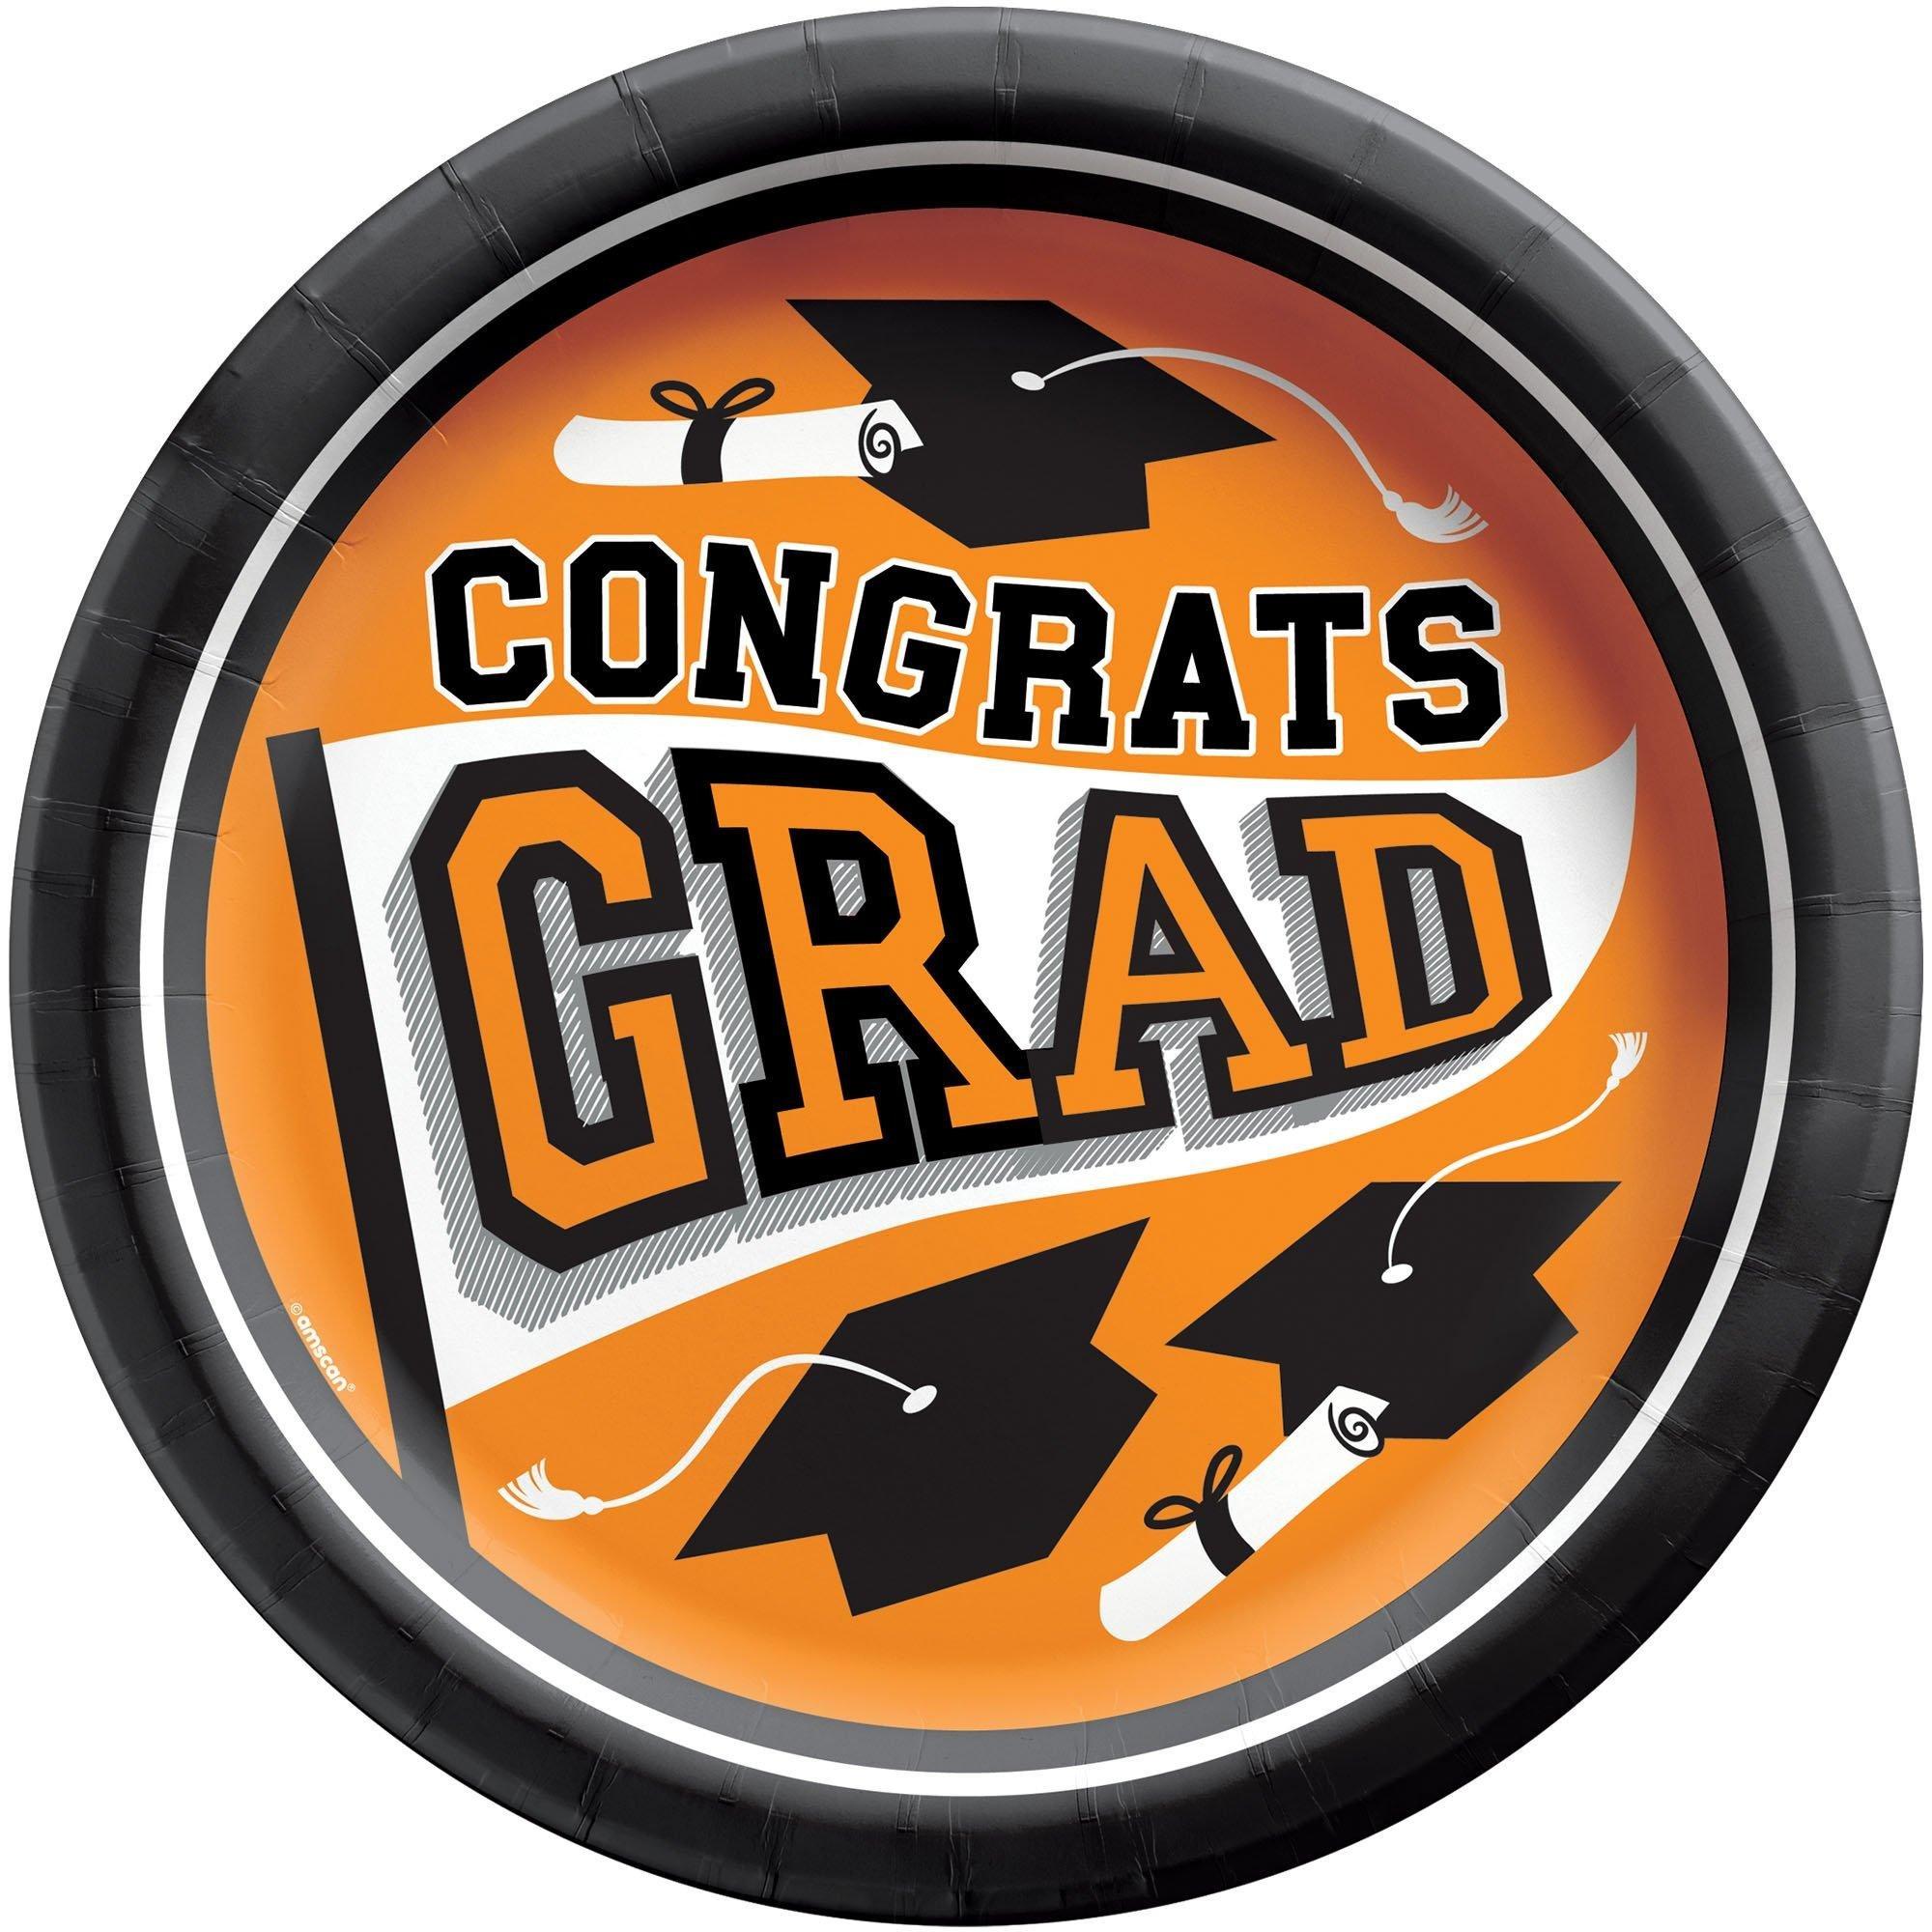 Graduation Party Supplies Kit for 80 with Decorations, Banners, Balloons, Plates, Napkins - Orange Congrats Grad